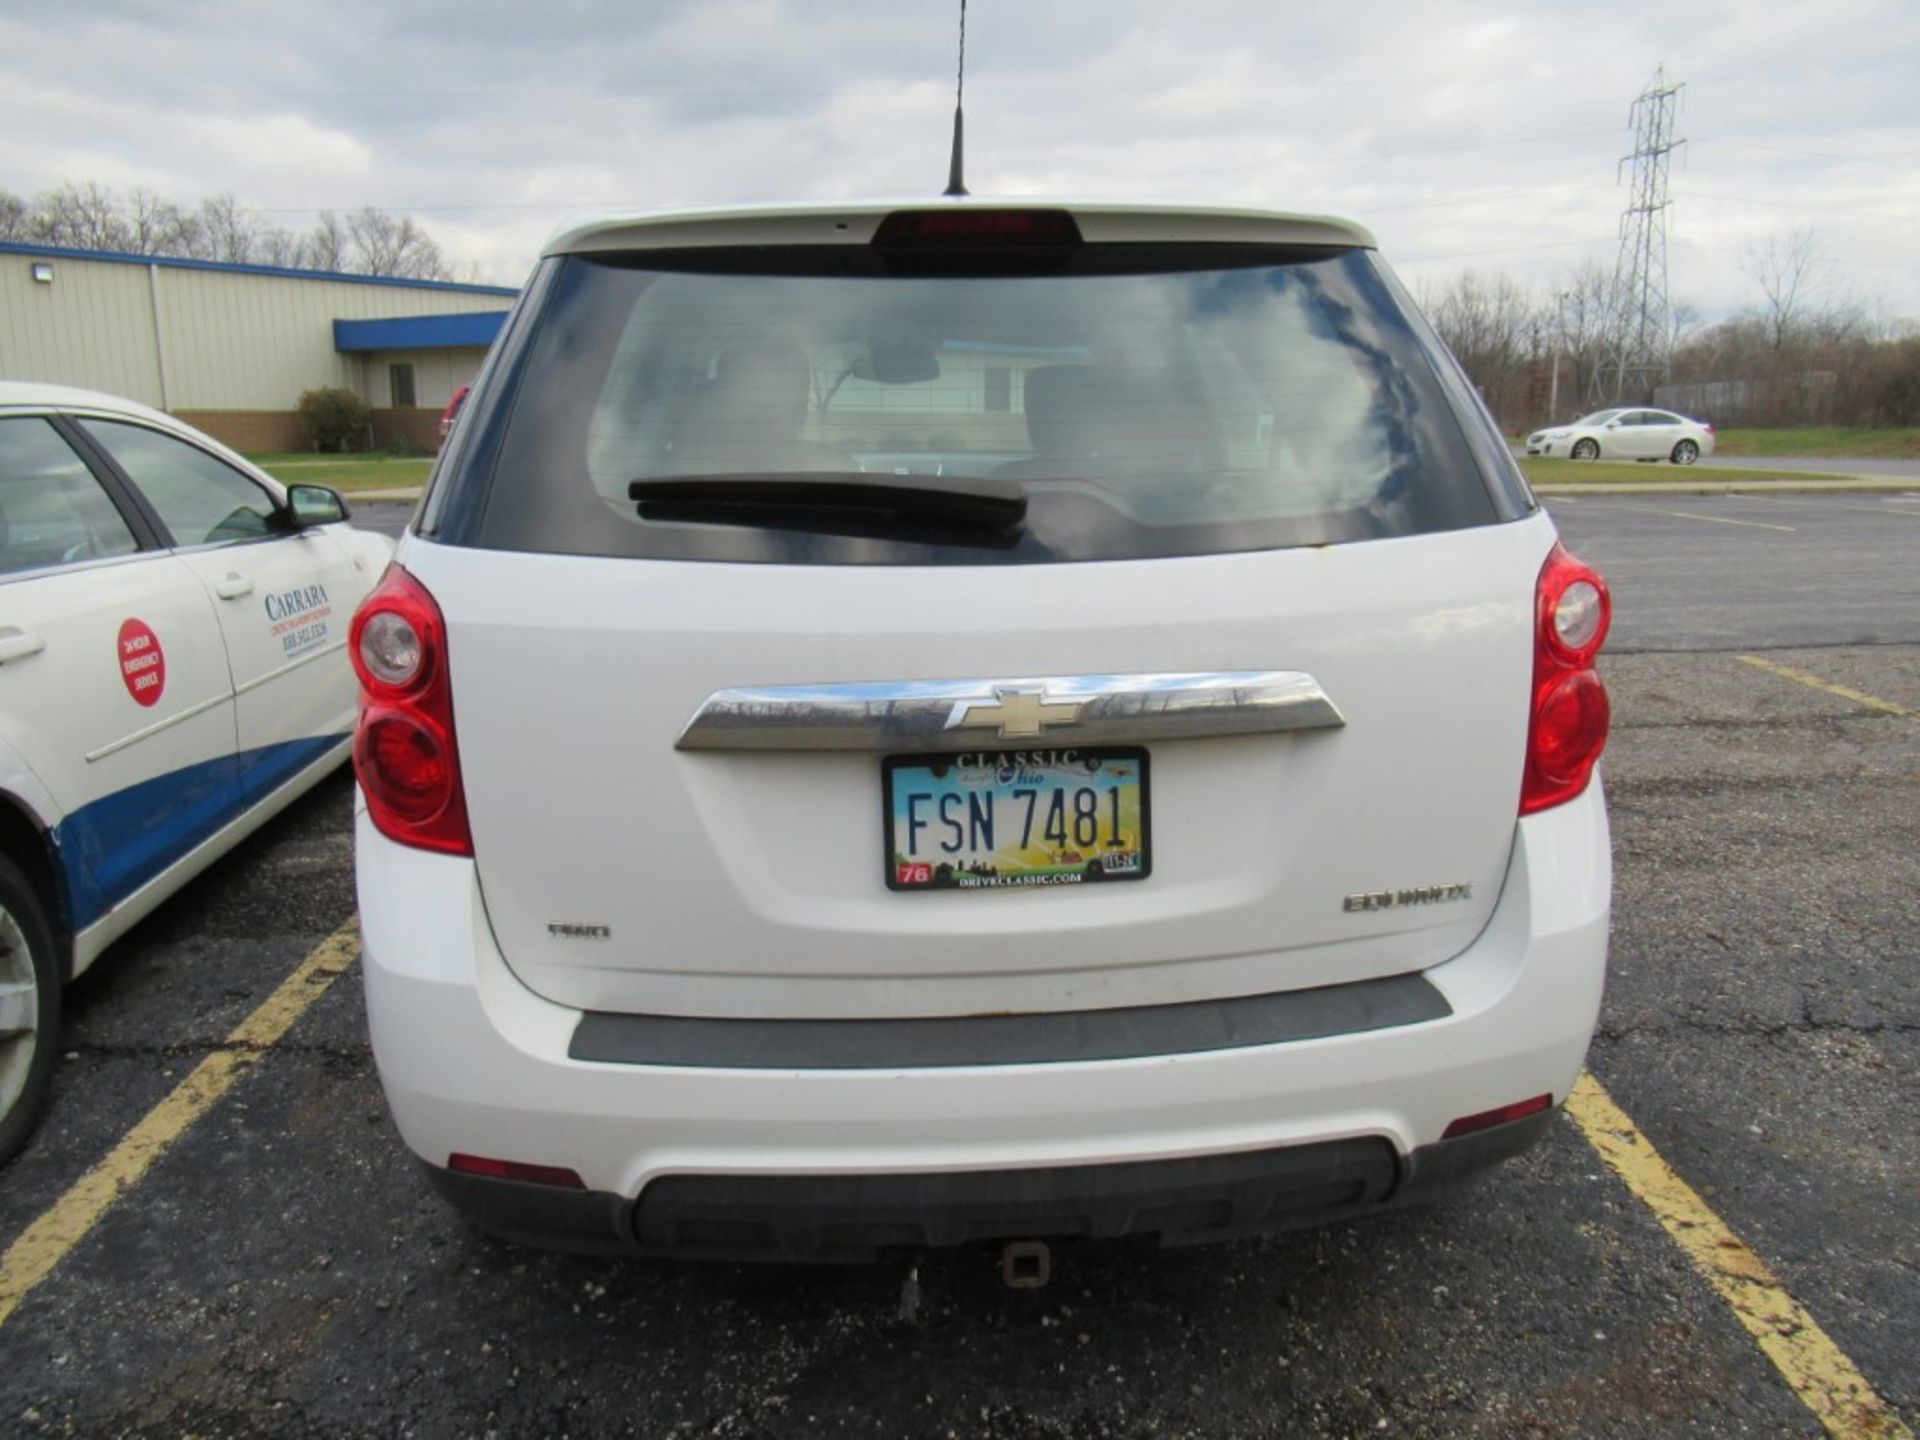 2013 Chevrolet Equinox SUV, VIN 2GNFLCEK2D6152539, Automatic, Cruise Control, AC, PW, PL, PS, AM/FM, - Image 7 of 26